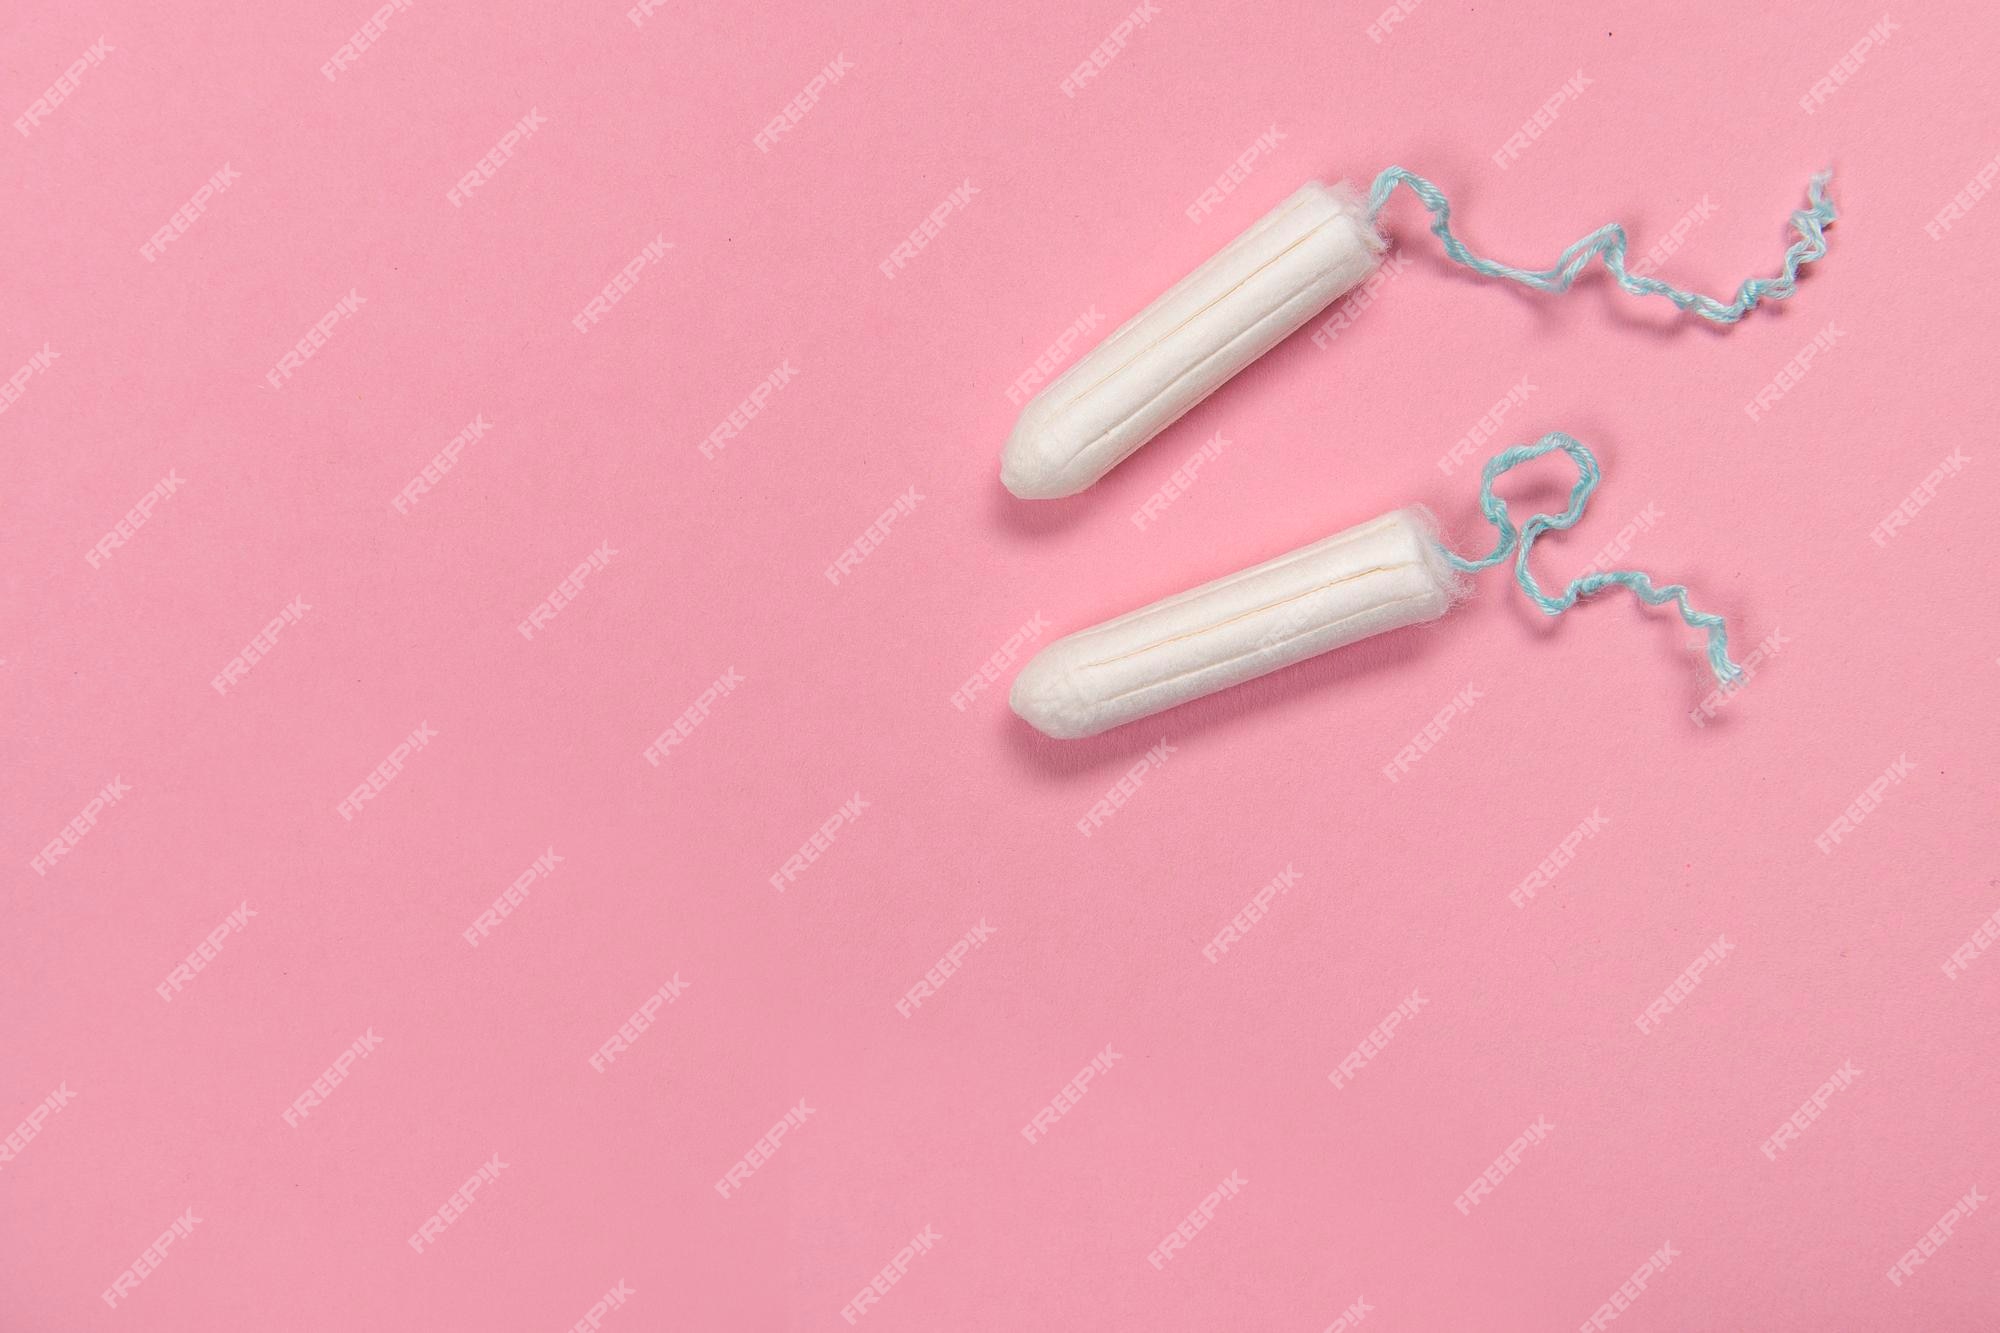 Lav en seng pris Fjernelse Premium Photo | Two tampons seen from a high angle view on a pink  background with space for copy